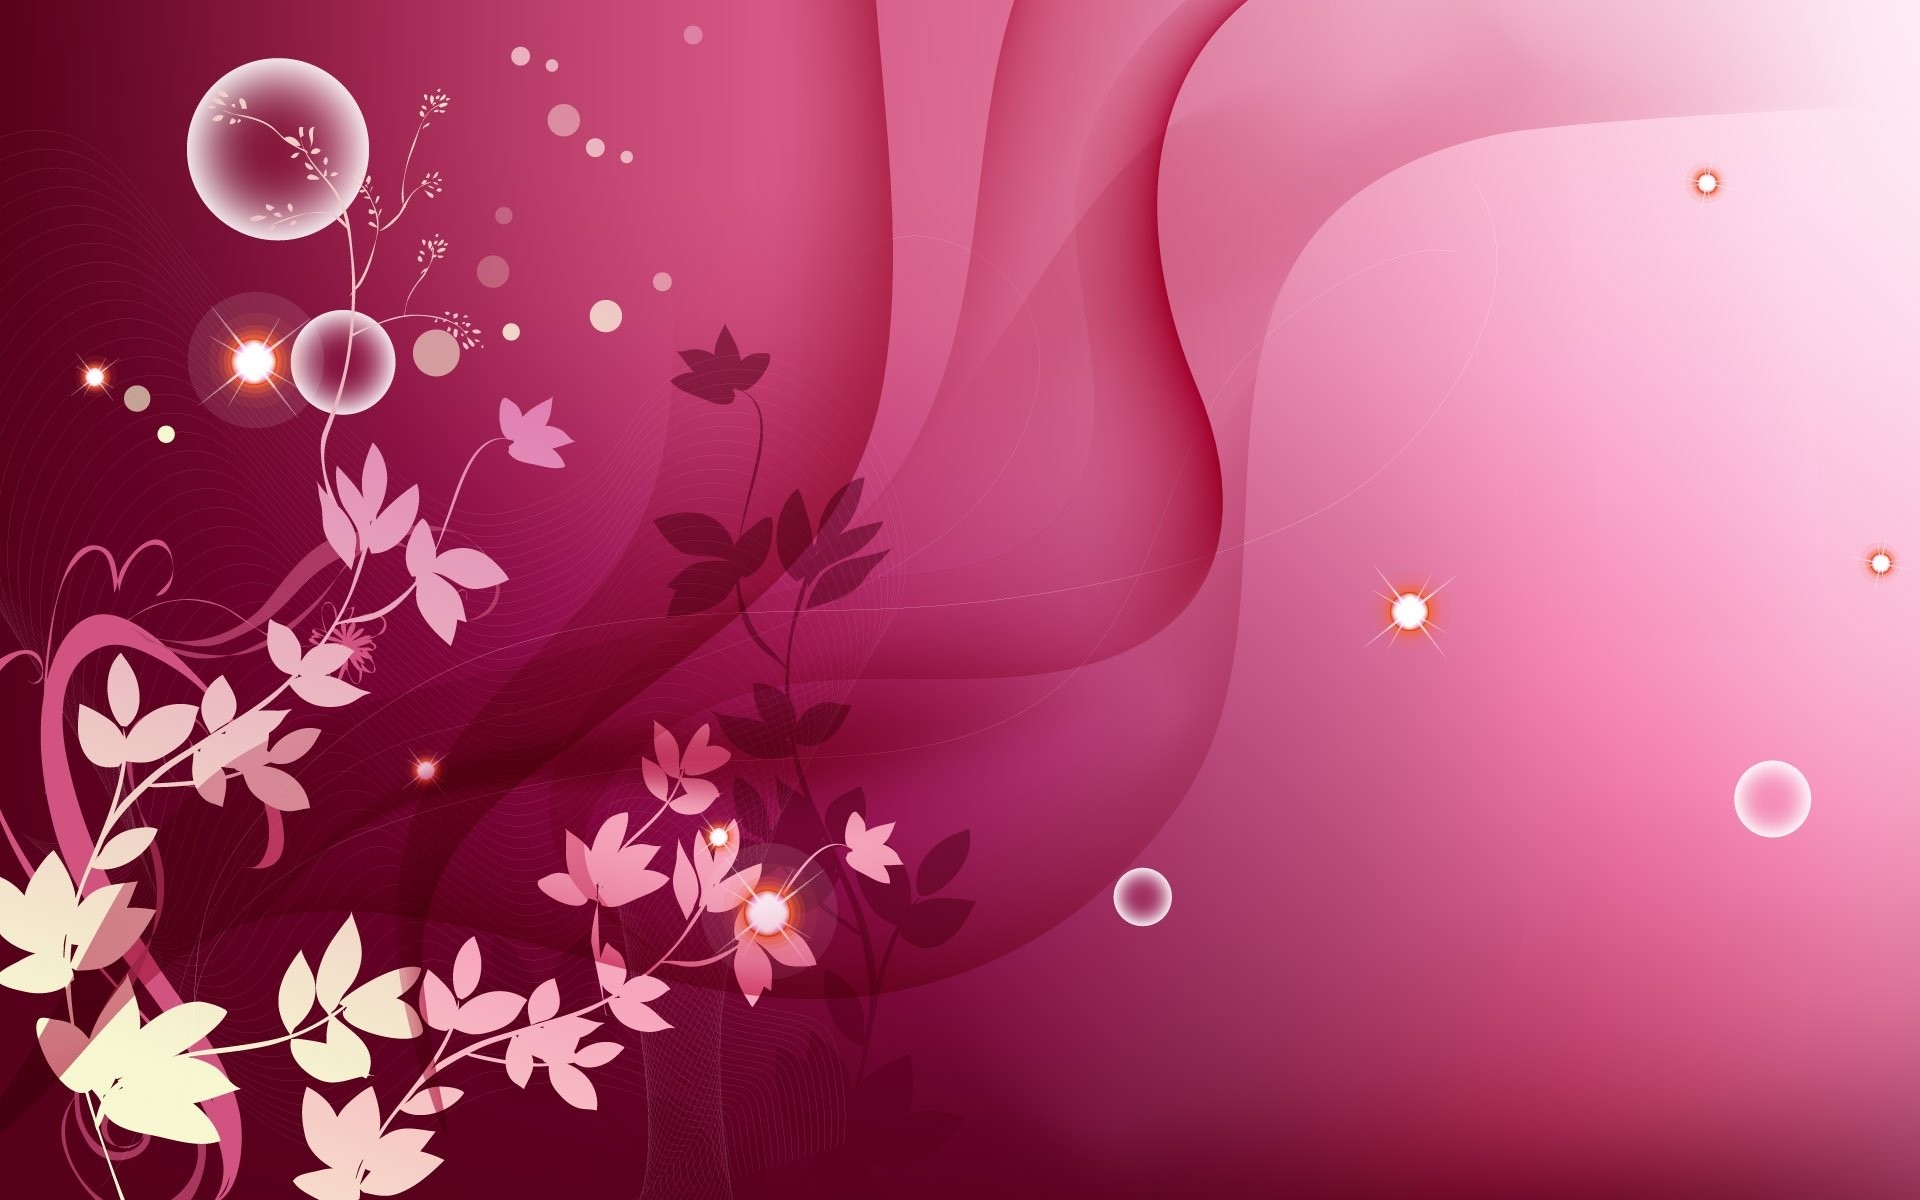 1920x1200 Pink Vector 528245. SHARE. TAGS: Powerpoint Backrounds Images Shower Baby  Backgrounds Pink Flowers. SPONSORED